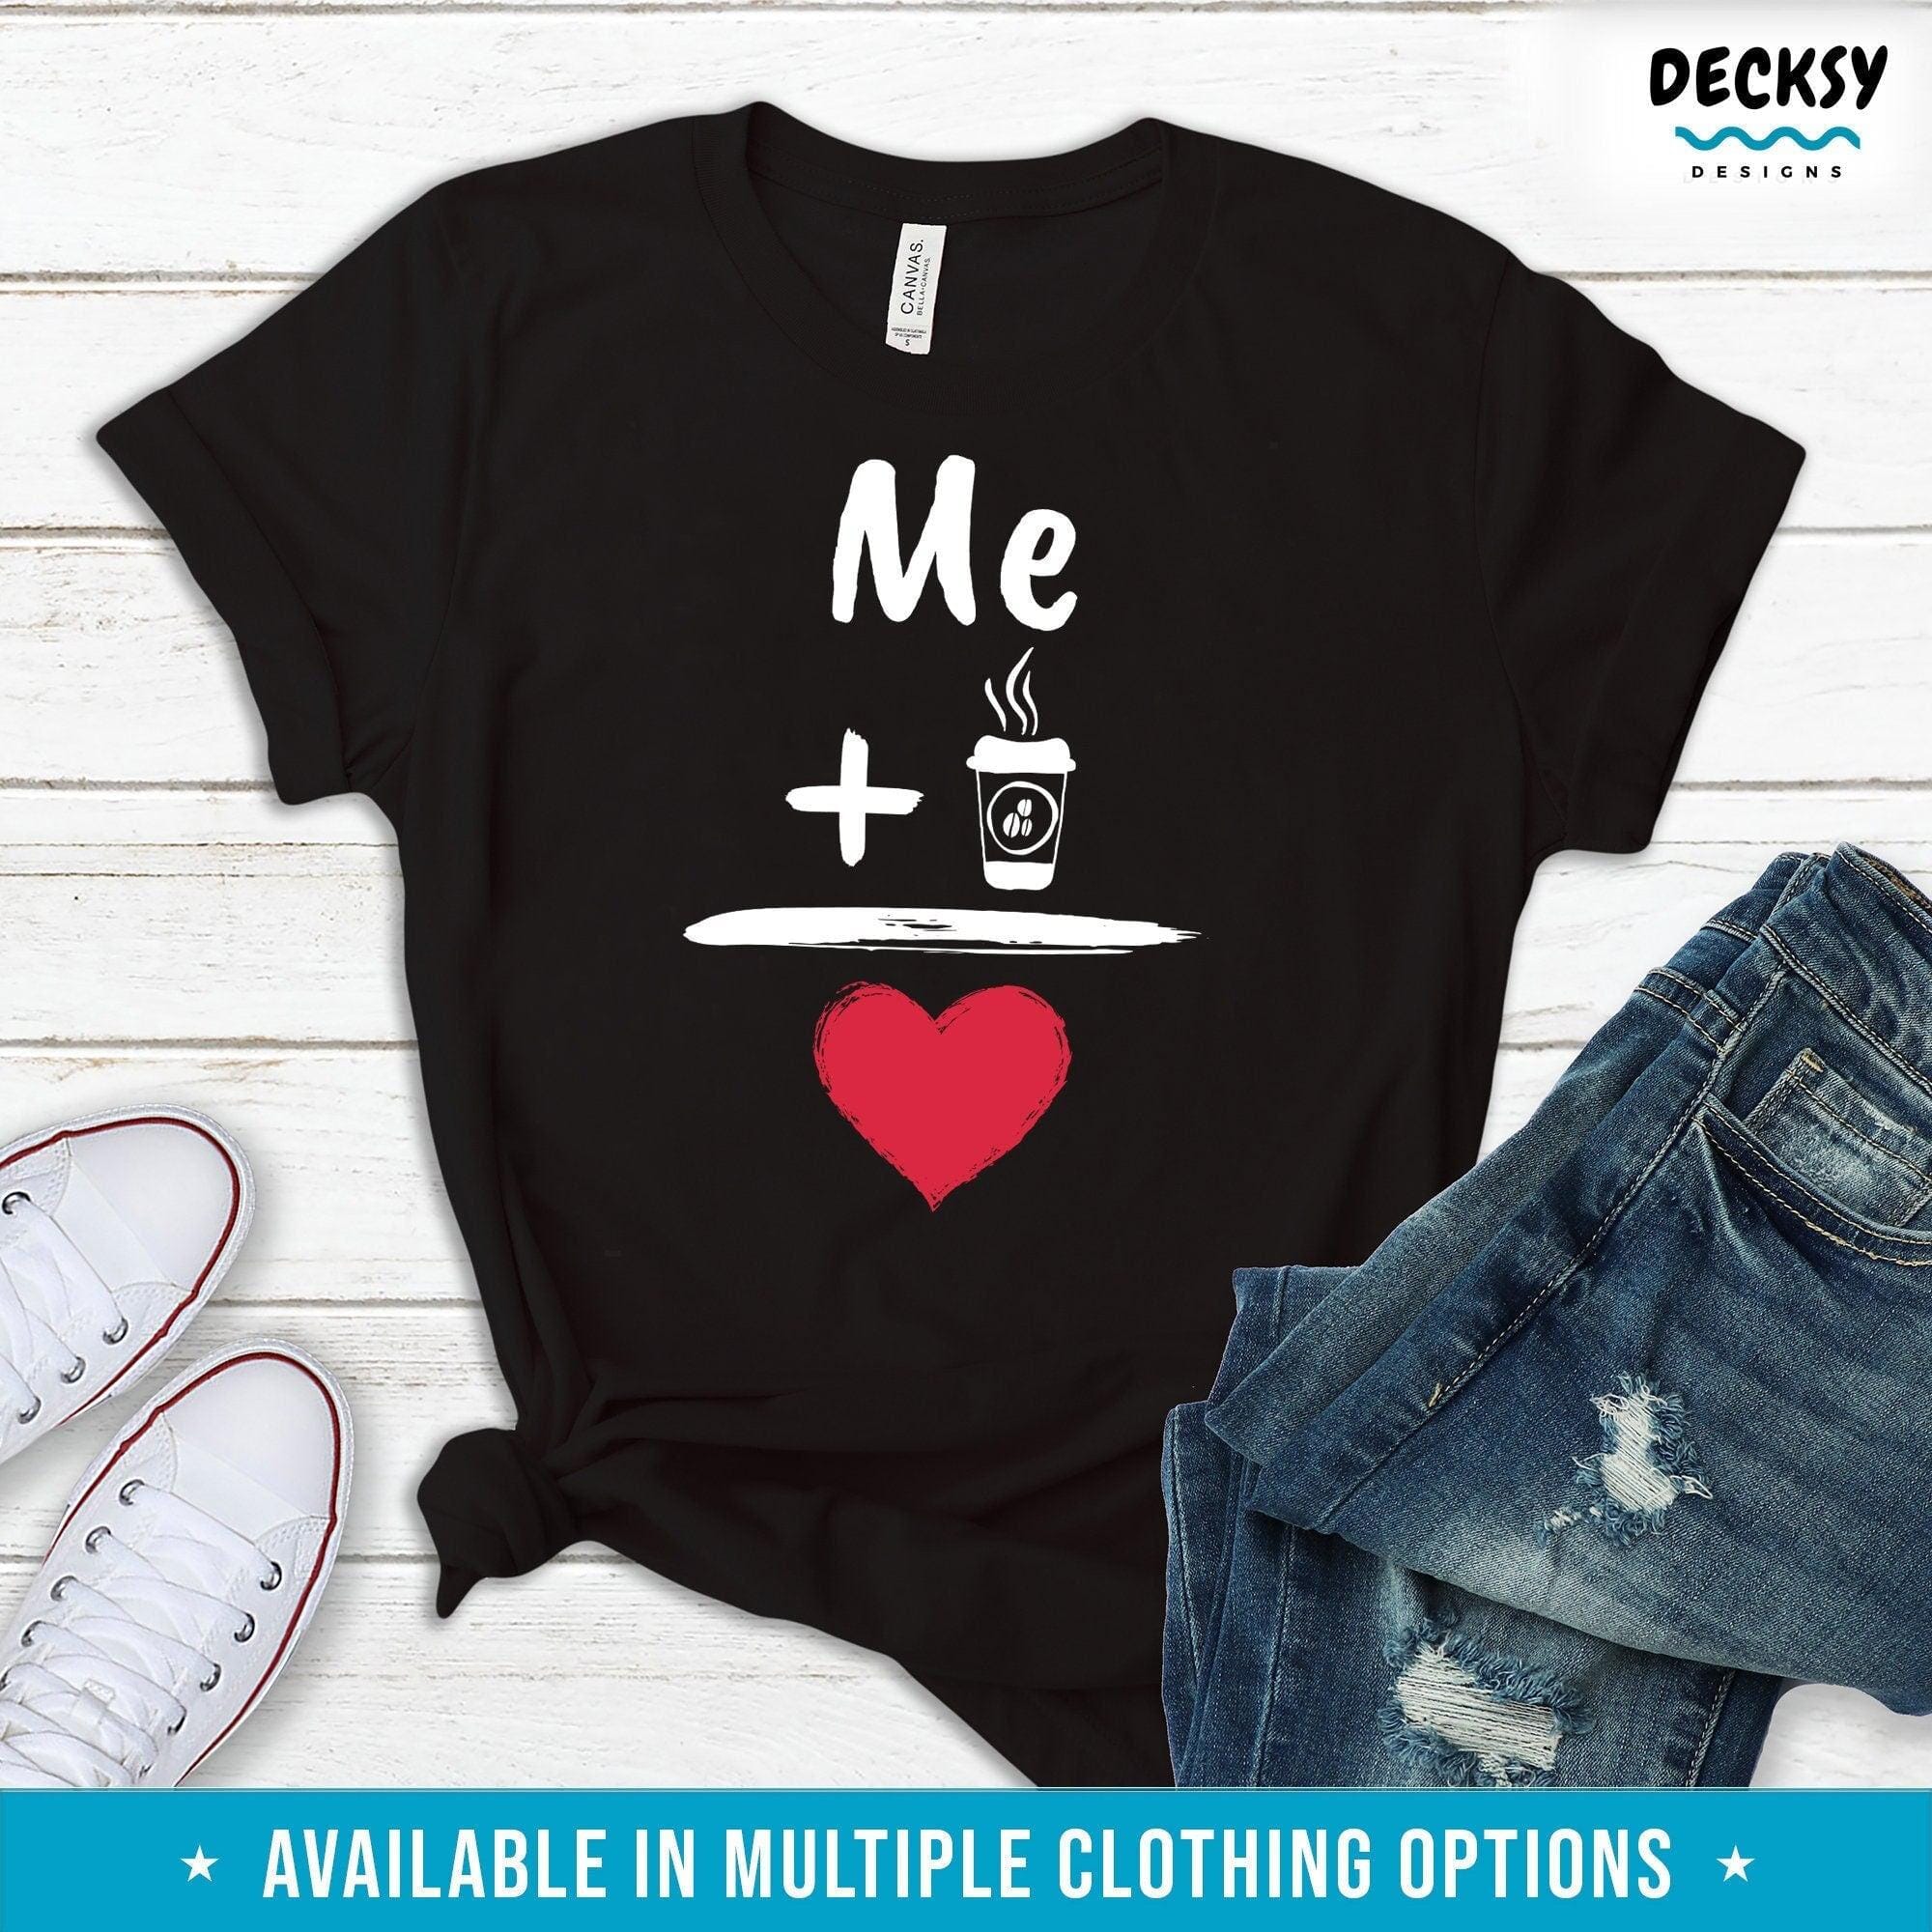 Coffee Lovers Shirt, Cute Coffee Gift-Clothing:Gender-Neutral Adult Clothing:Tops & Tees:T-shirts:Graphic Tees-DecksyDesigns